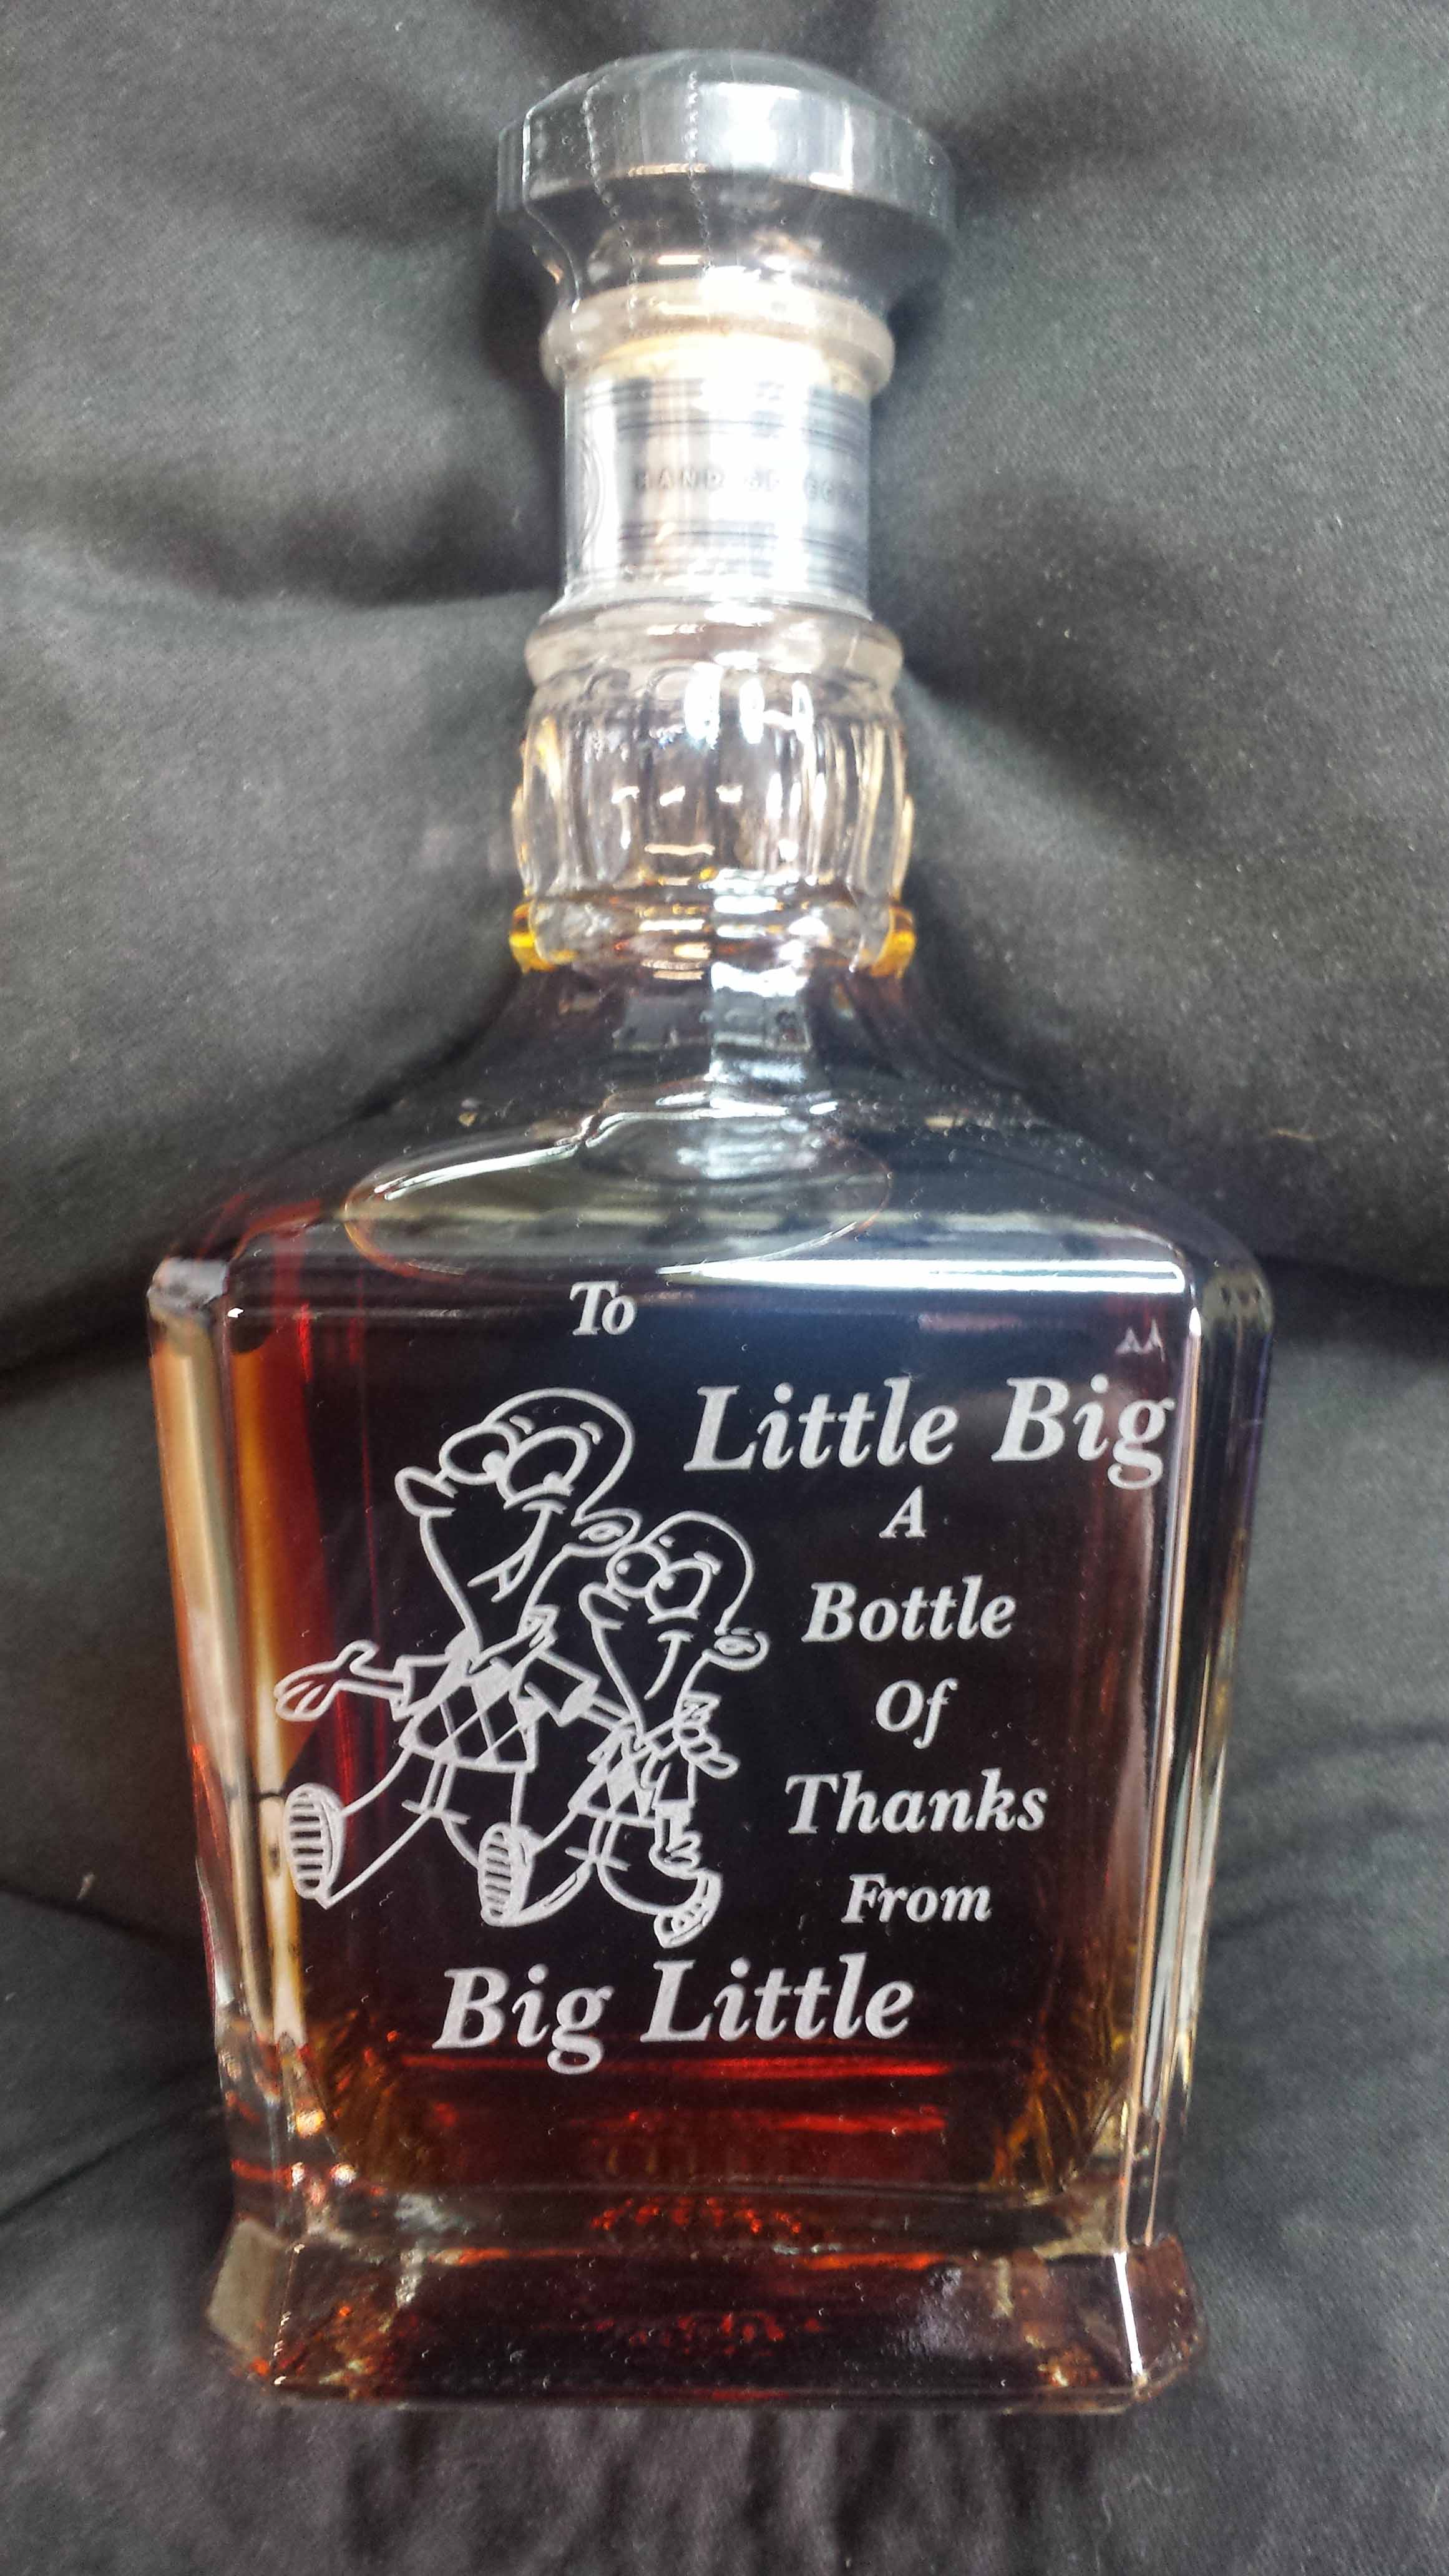 This bottle of spitits is engraves with a cartton of two men, one tall, one short and both bauld striding along together with the words 'To Little Big A Bottle Of Thanks From Big Little.